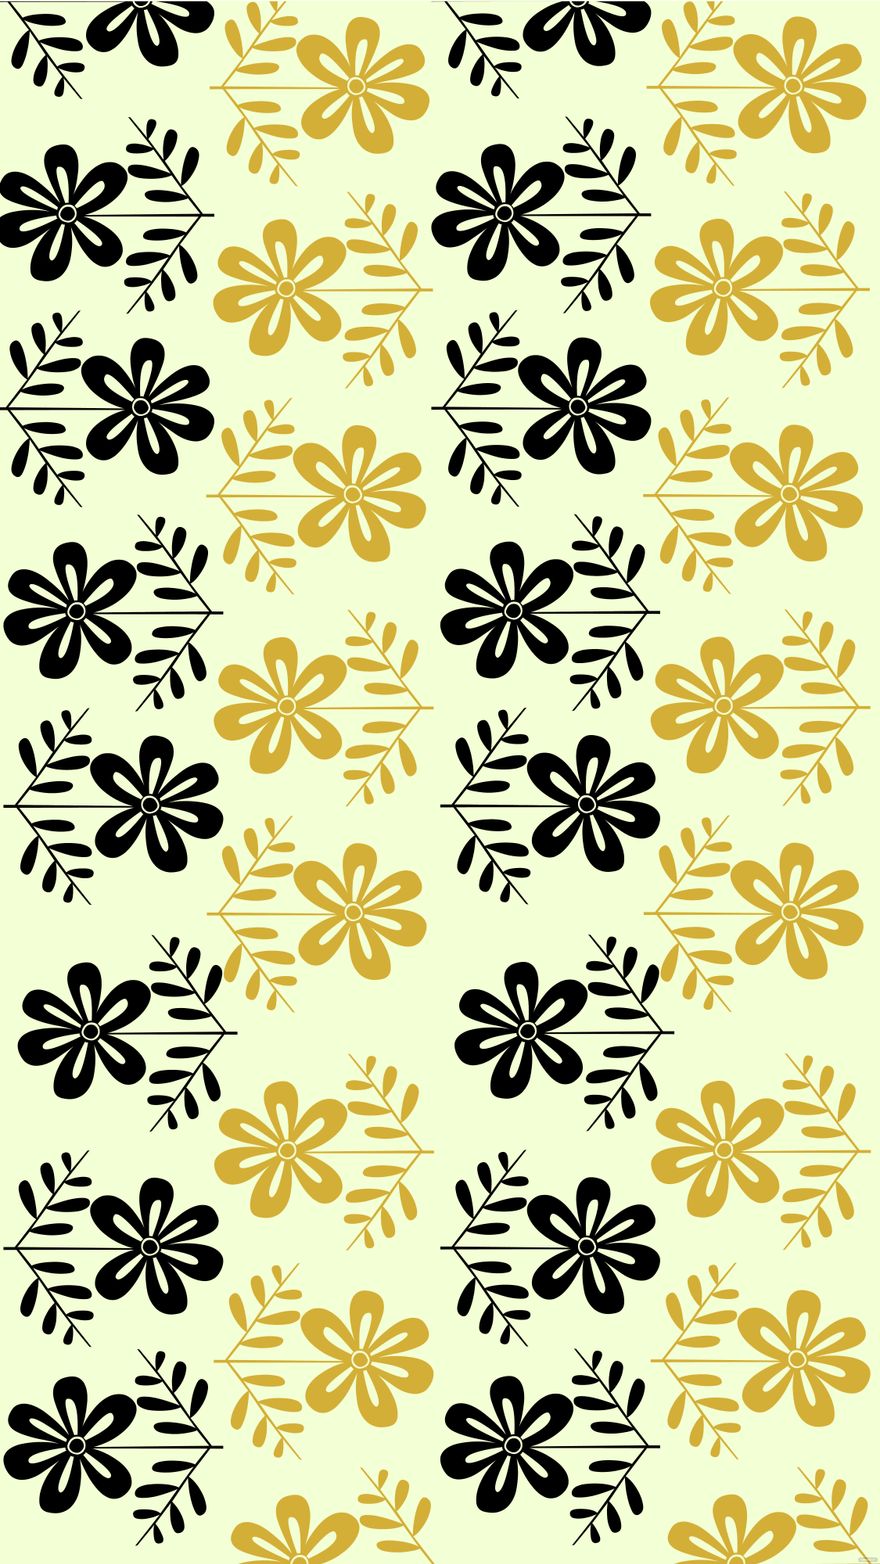 Free Black and Gold Floral Background